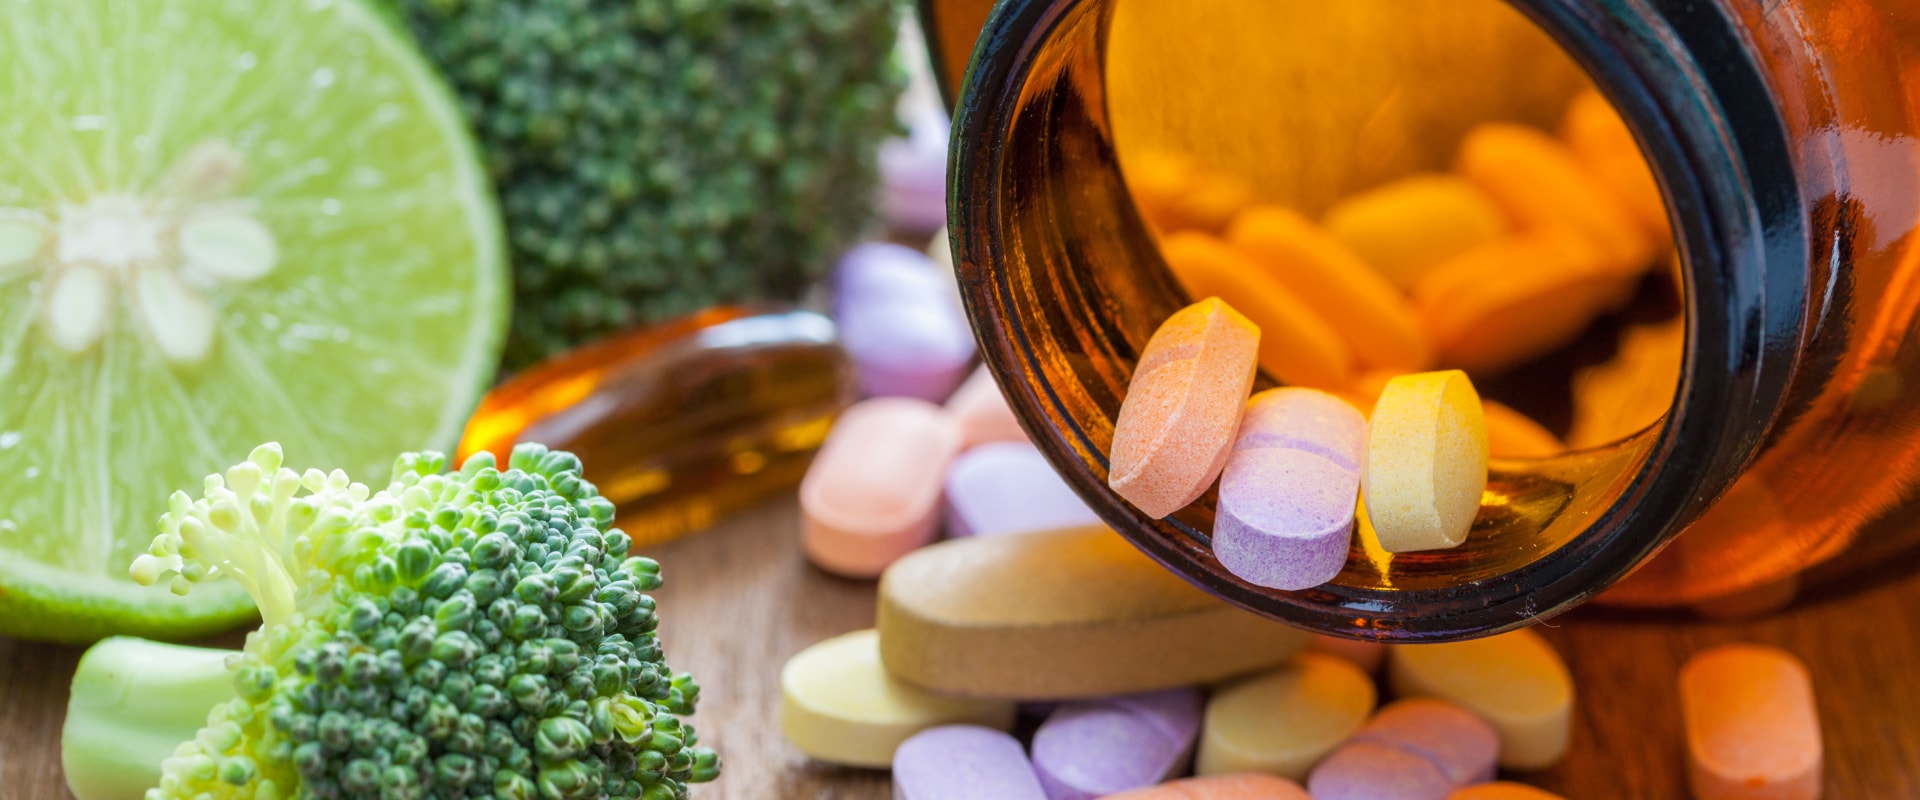 The FDA's Role in Regulating Dietary Supplements: An Expert's Perspective